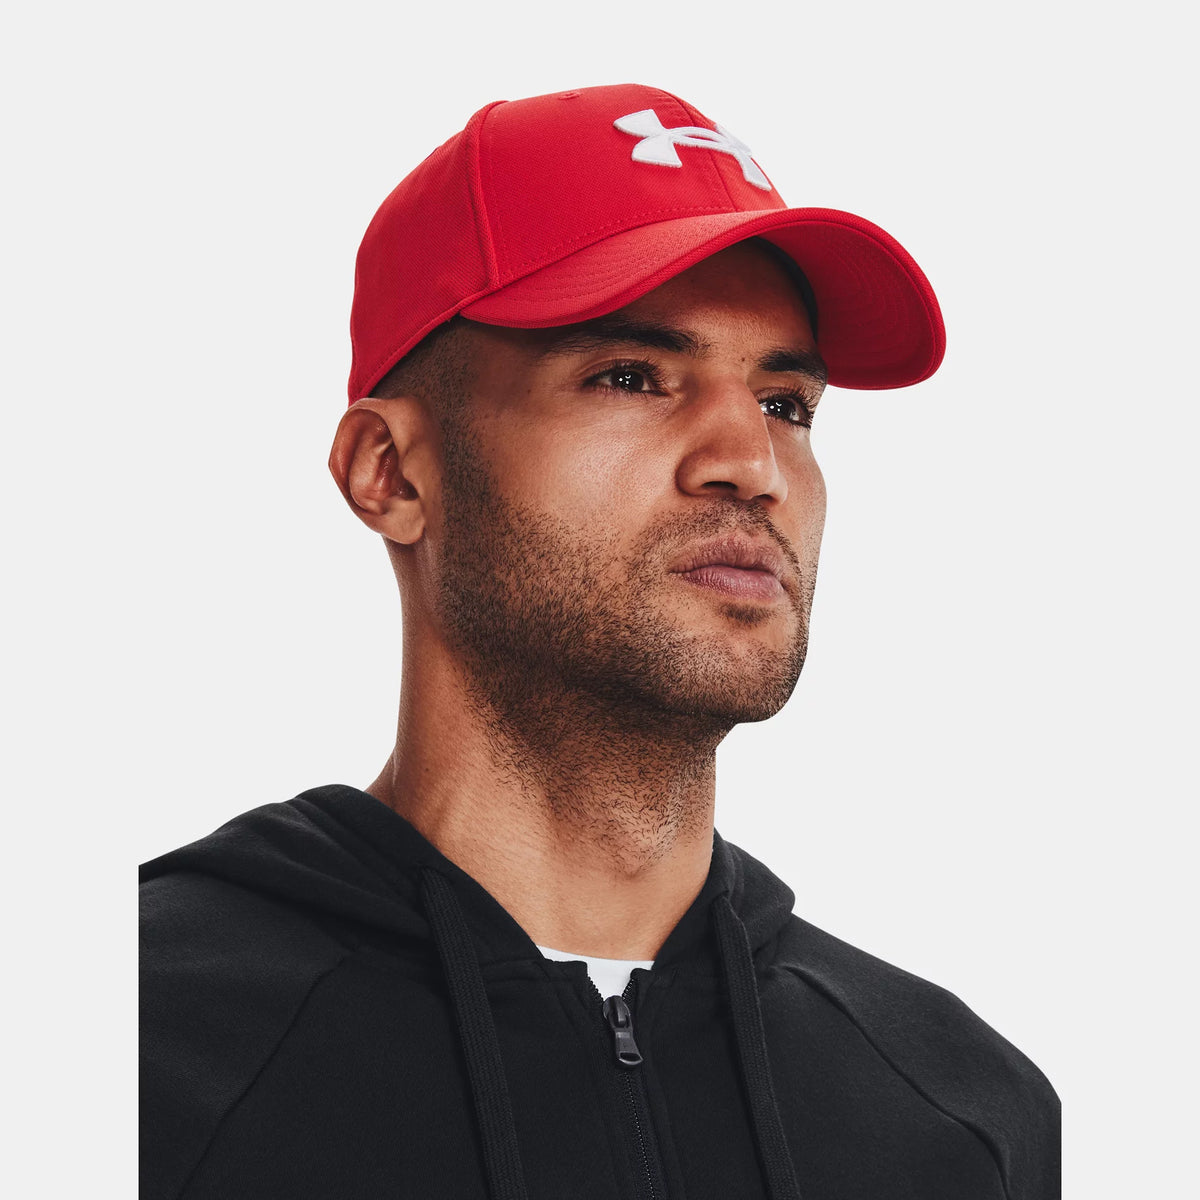 Under Armour Blitzing Baseball Cap: Red/White - M/L